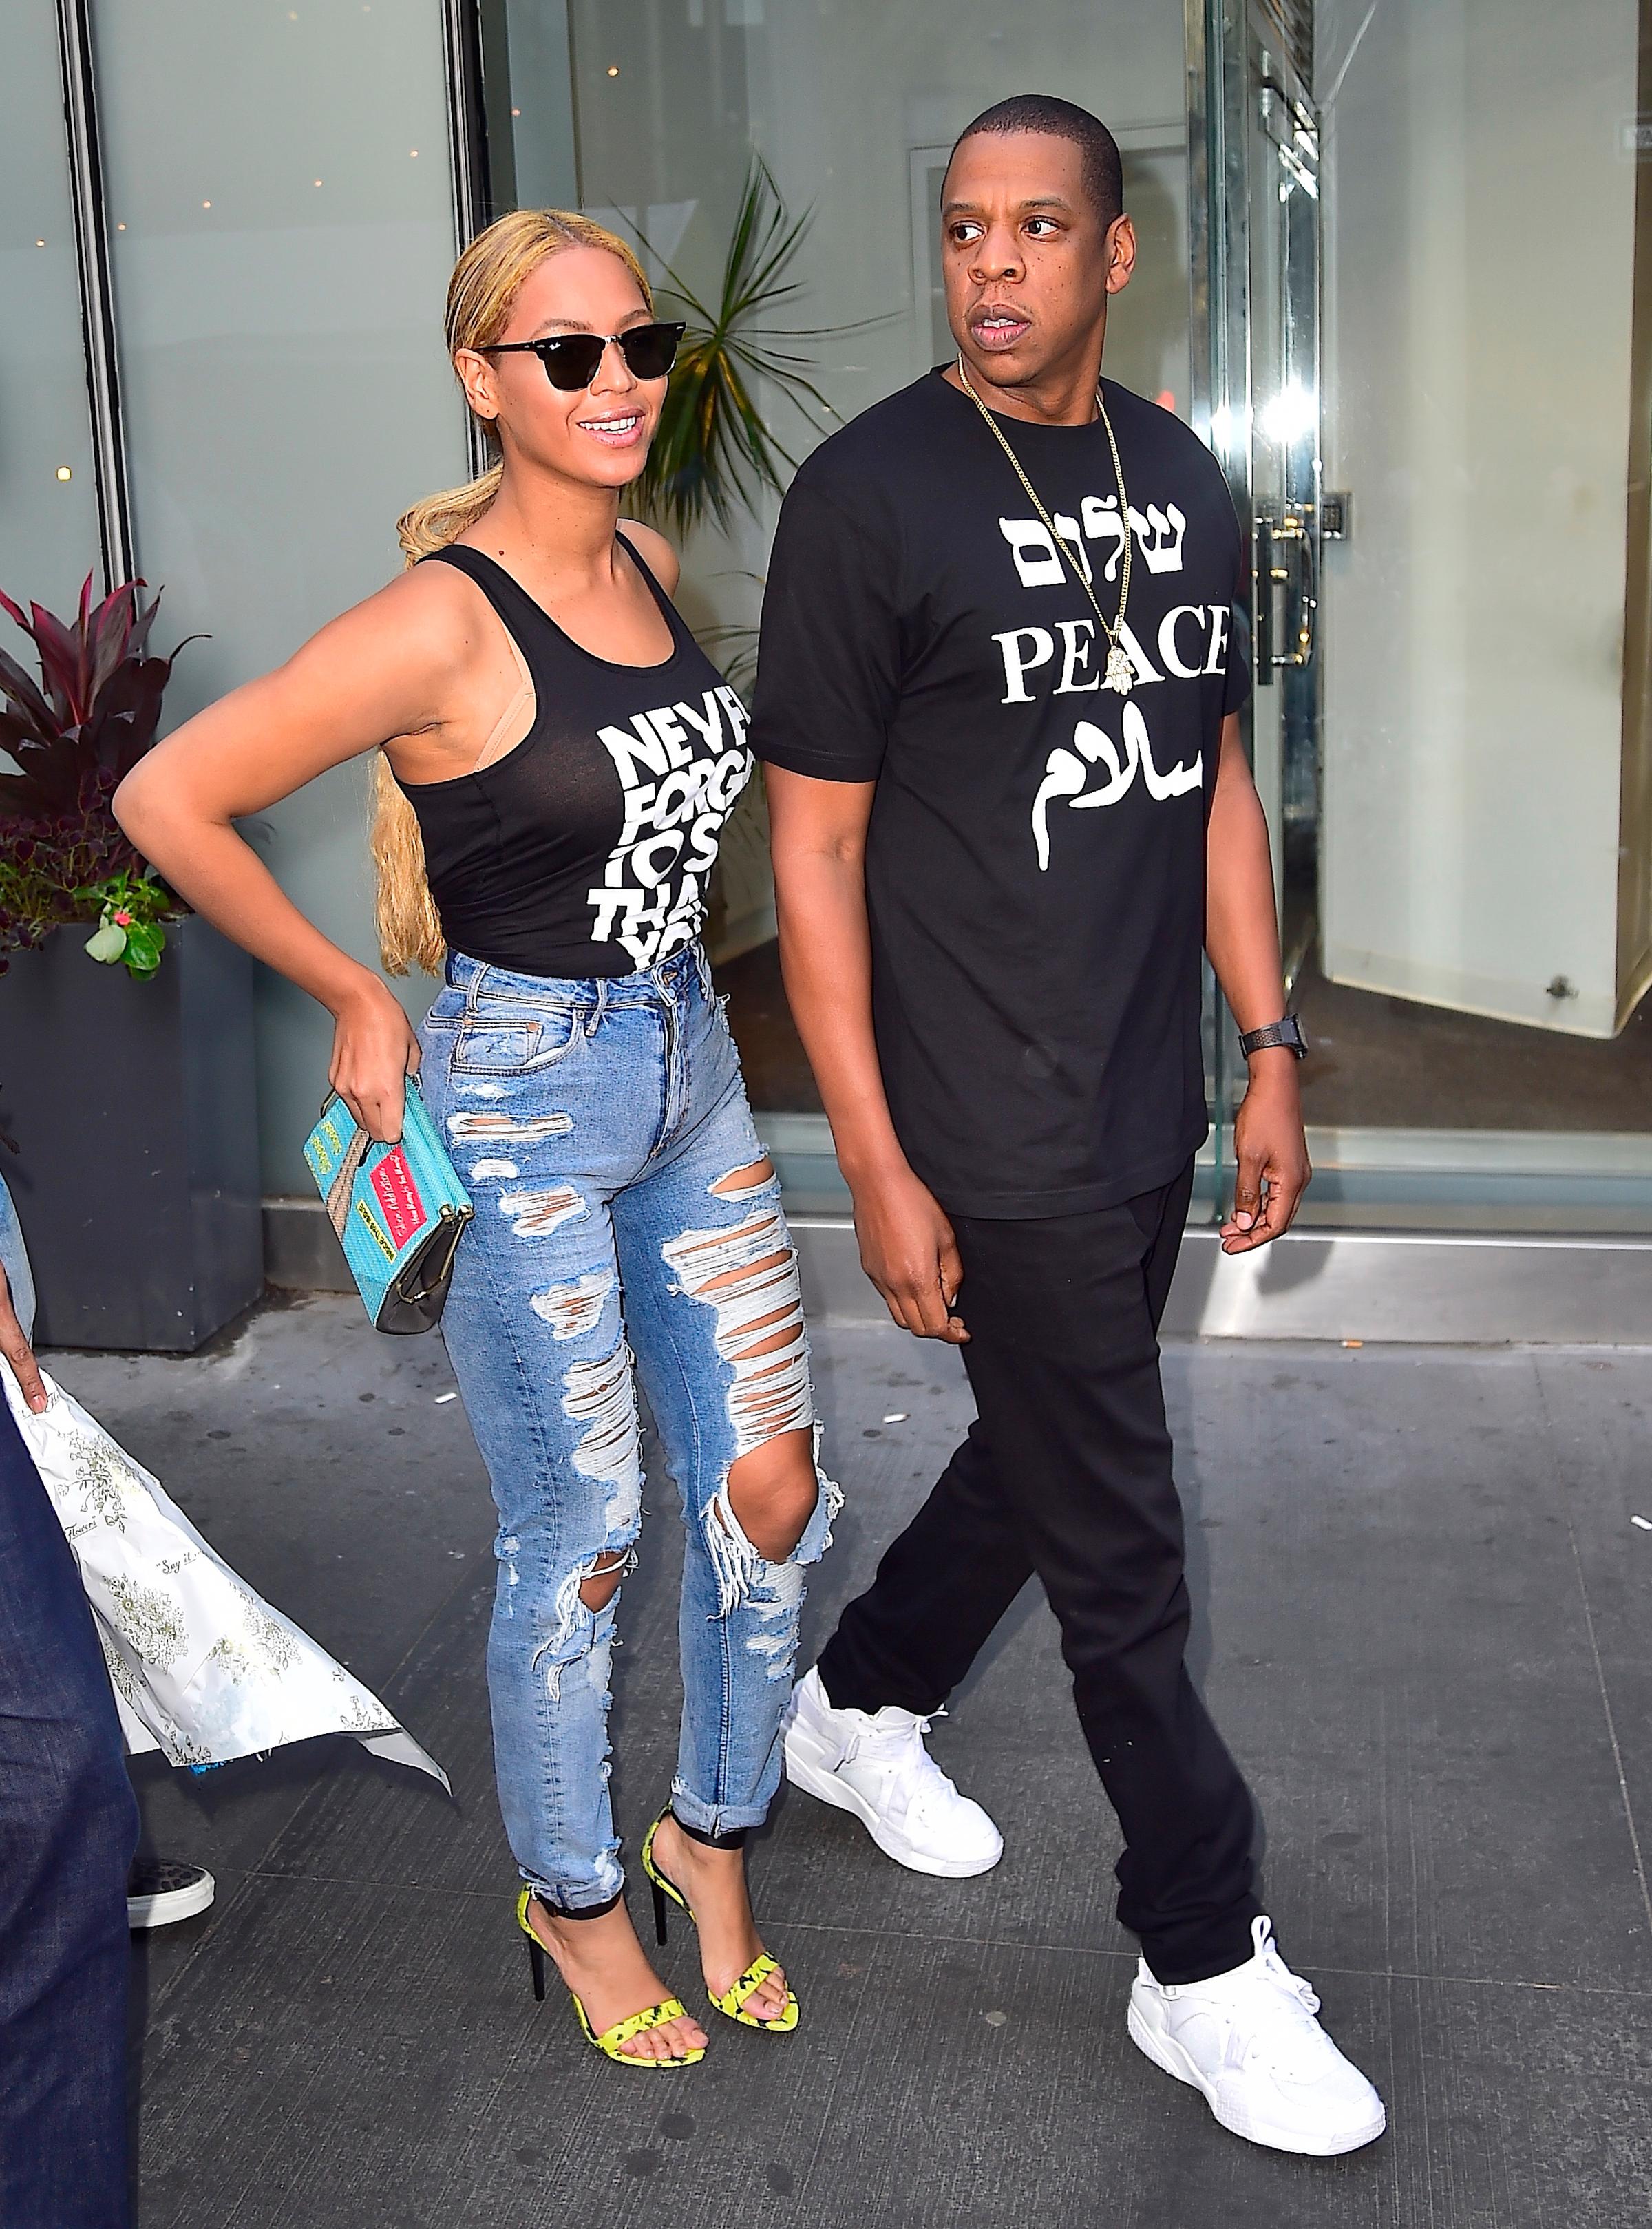 Celebrity Sightings In New York City - May 11, 2015